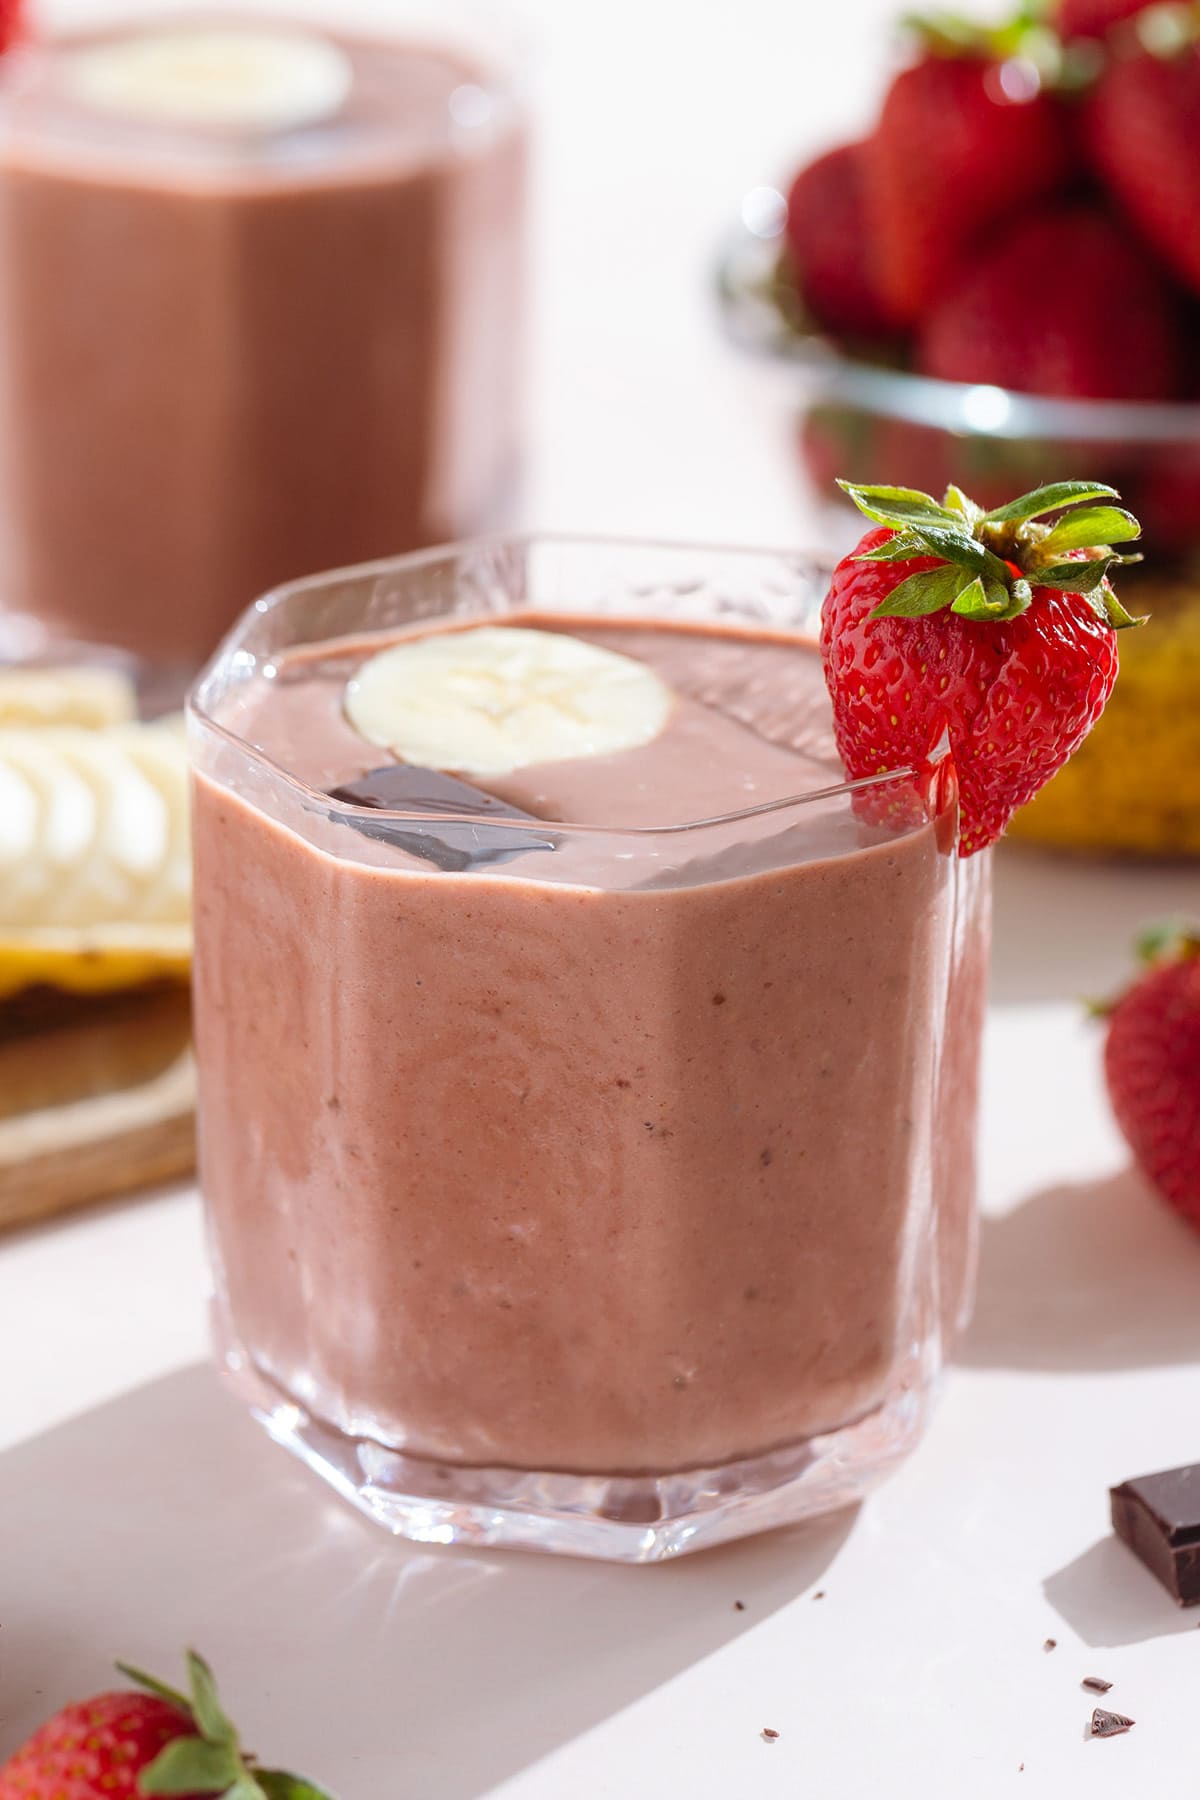 Strawberry smoothie in a short glass garnished with a strawberry, a banana slice, and a square of chocolate.